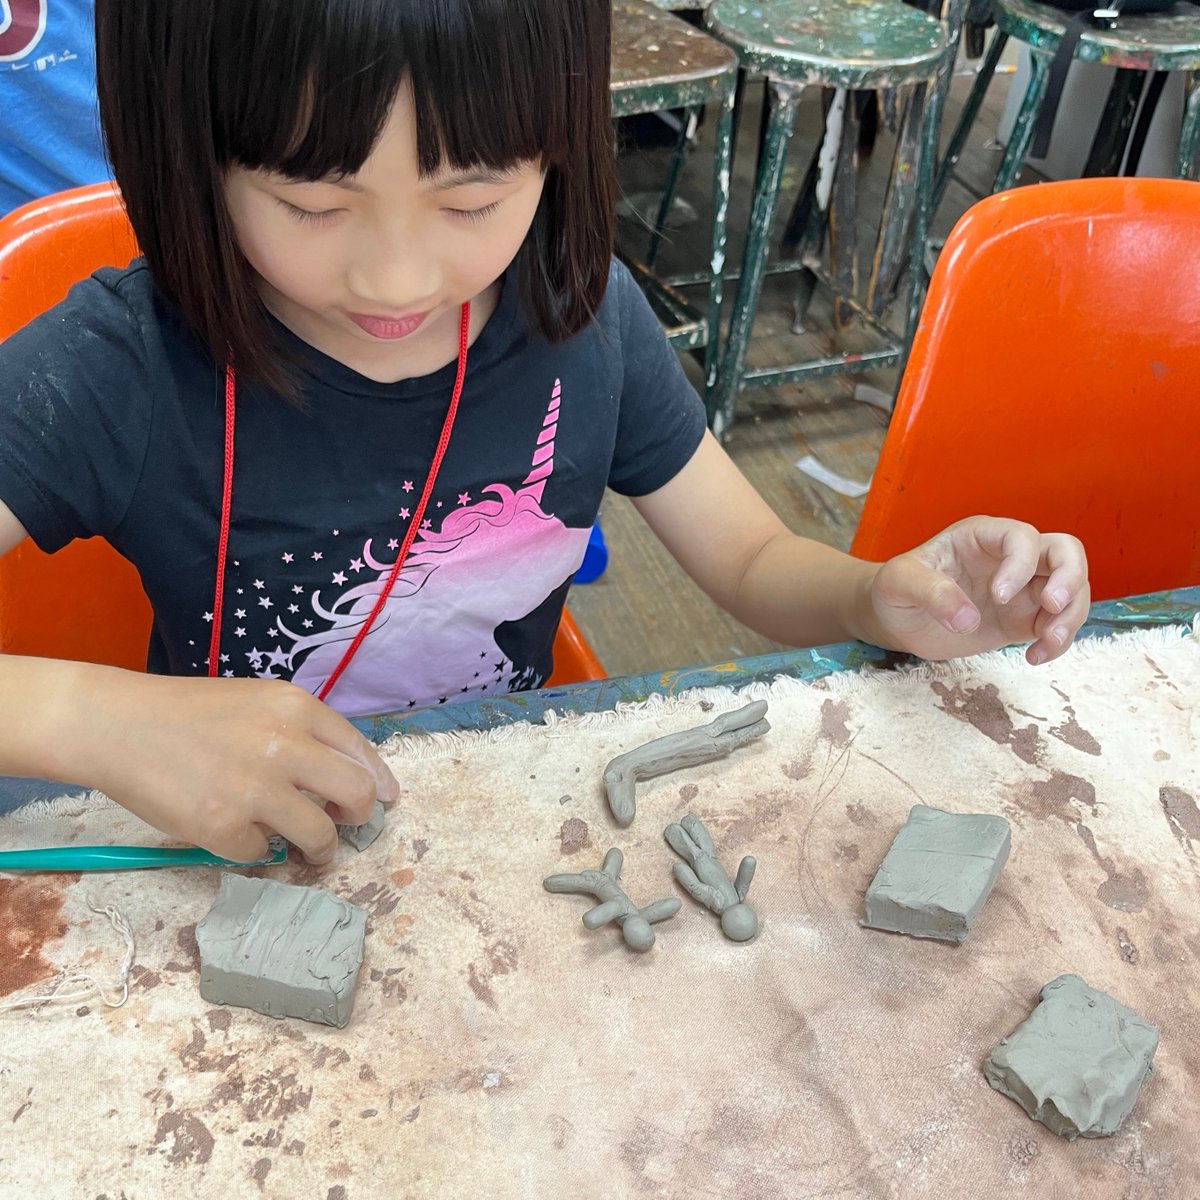 Highlights from week 2 of summer camp! Enroll your young artist in a session for next week's camp including Sculpture, Art & Activism, Mural Masterpiece and more! fleisher.org/take-a-class/s… Fleisher will be closed on Tuesday, July 4. Rates are prorated to reflect the 4-day week.